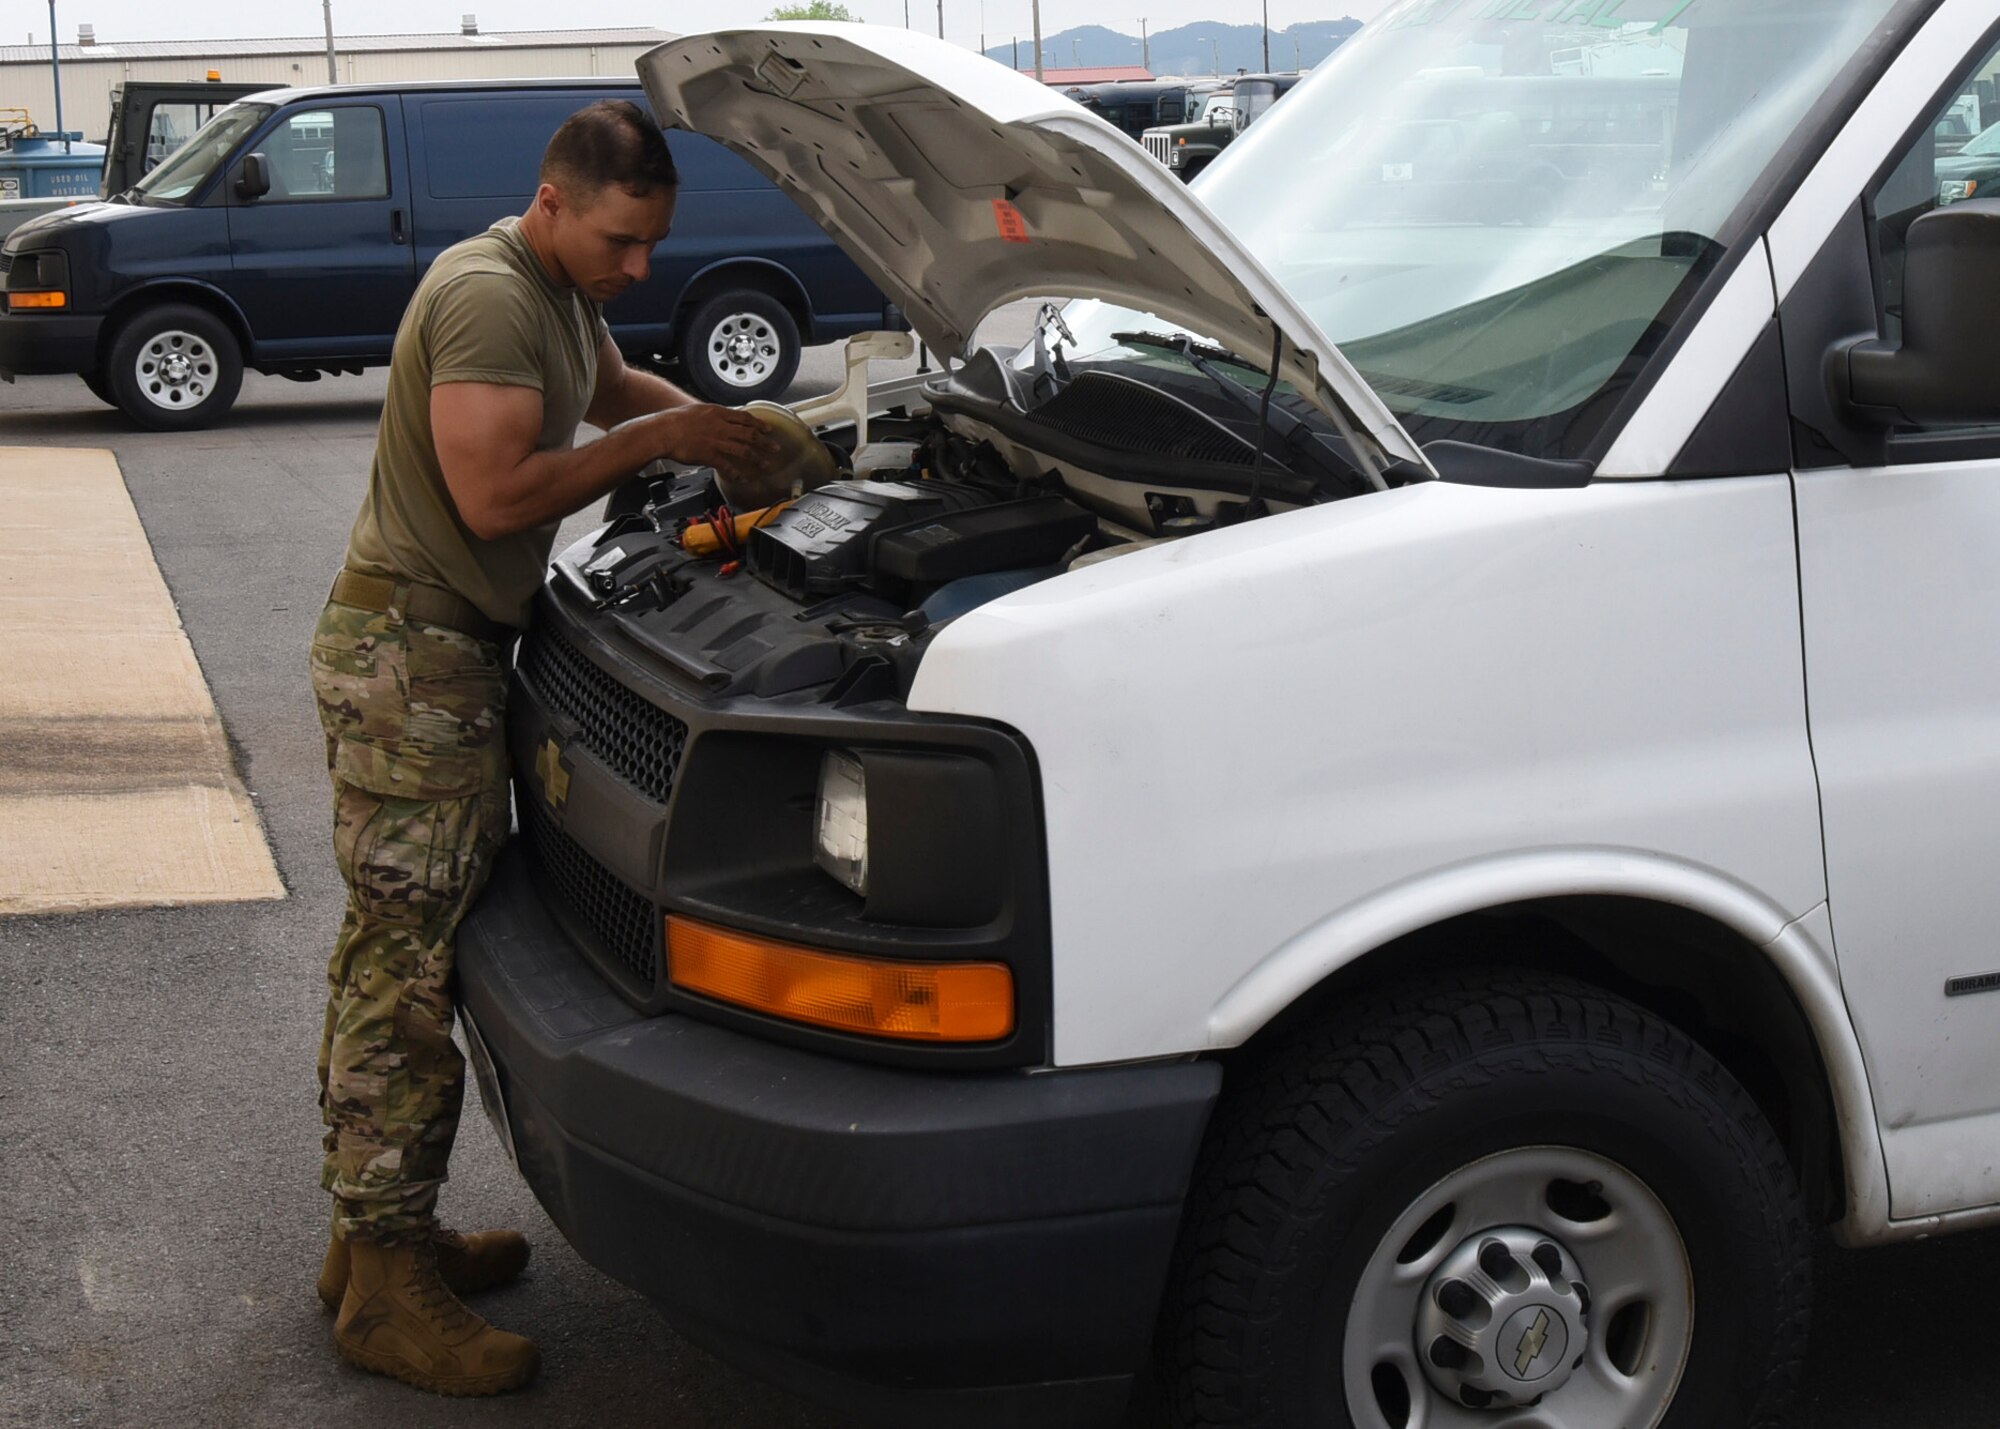 Tech. Sgt. John Bishop, 8th Logistics Readiness Squadron NCO in charge of vehicle maintenance, removes the coolant from a vehicle to inspect its sensor at Kunsan Air Base, Republic of Korea, June 4, 2020. Bishop is troubleshooting a low coolant light on the vehicle by checking the voltage to ensure the sensor is getting power. (U.S. Air Force photo by Staff Sgt. Anthony Hetlage)